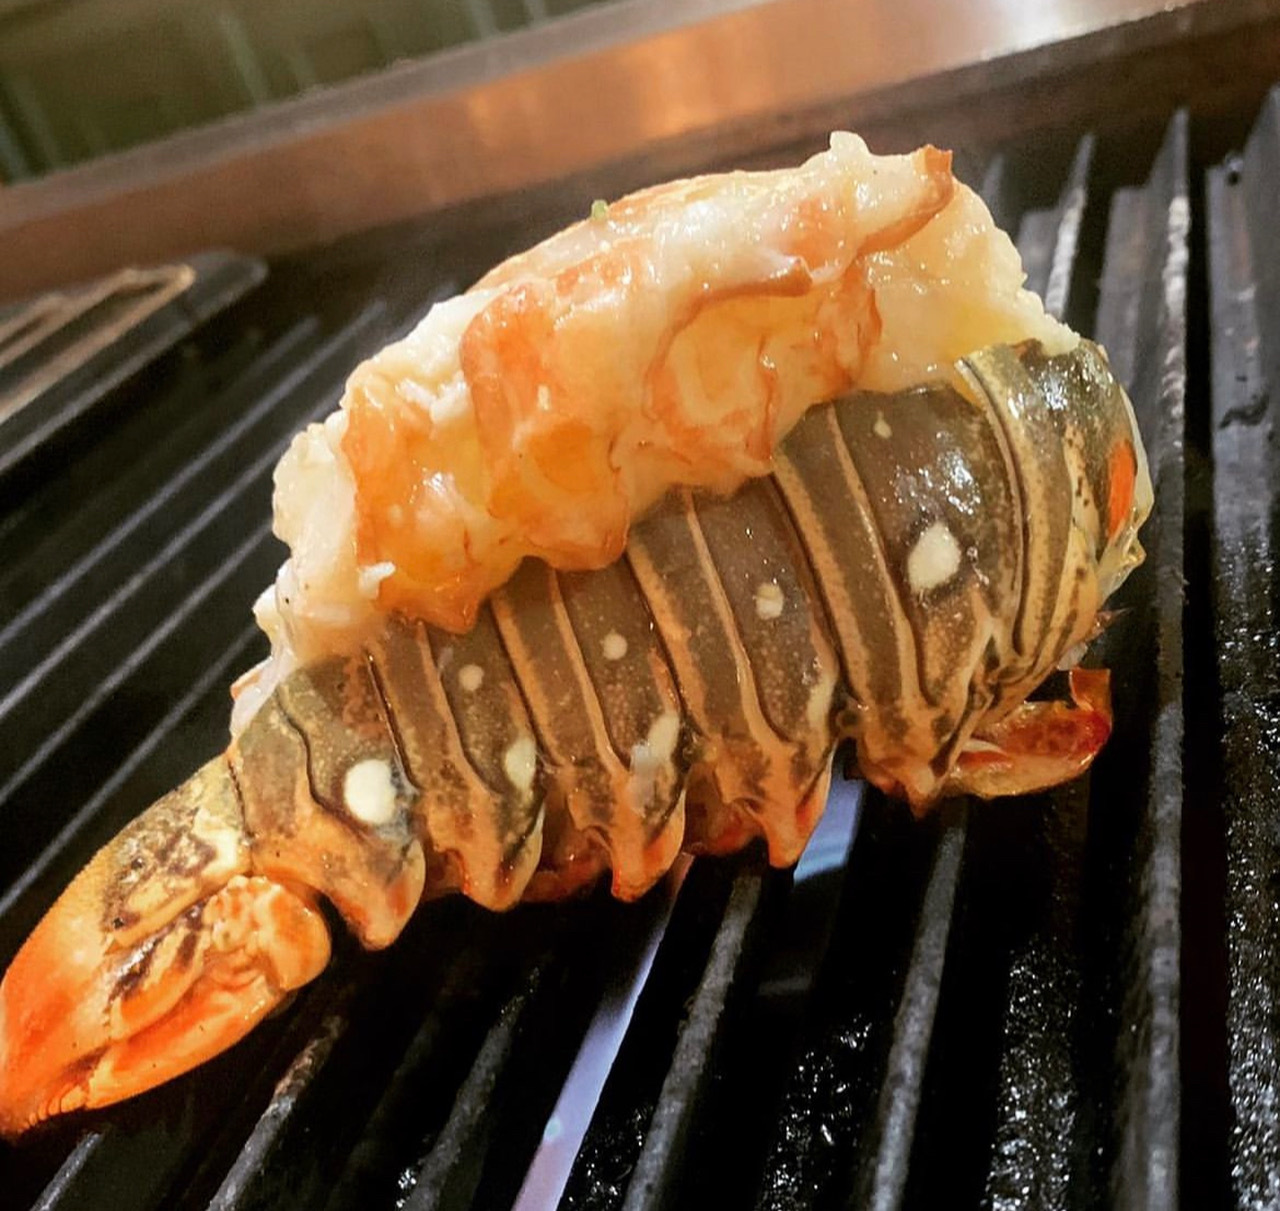 Chargrilled lobster tail served with garlic butter